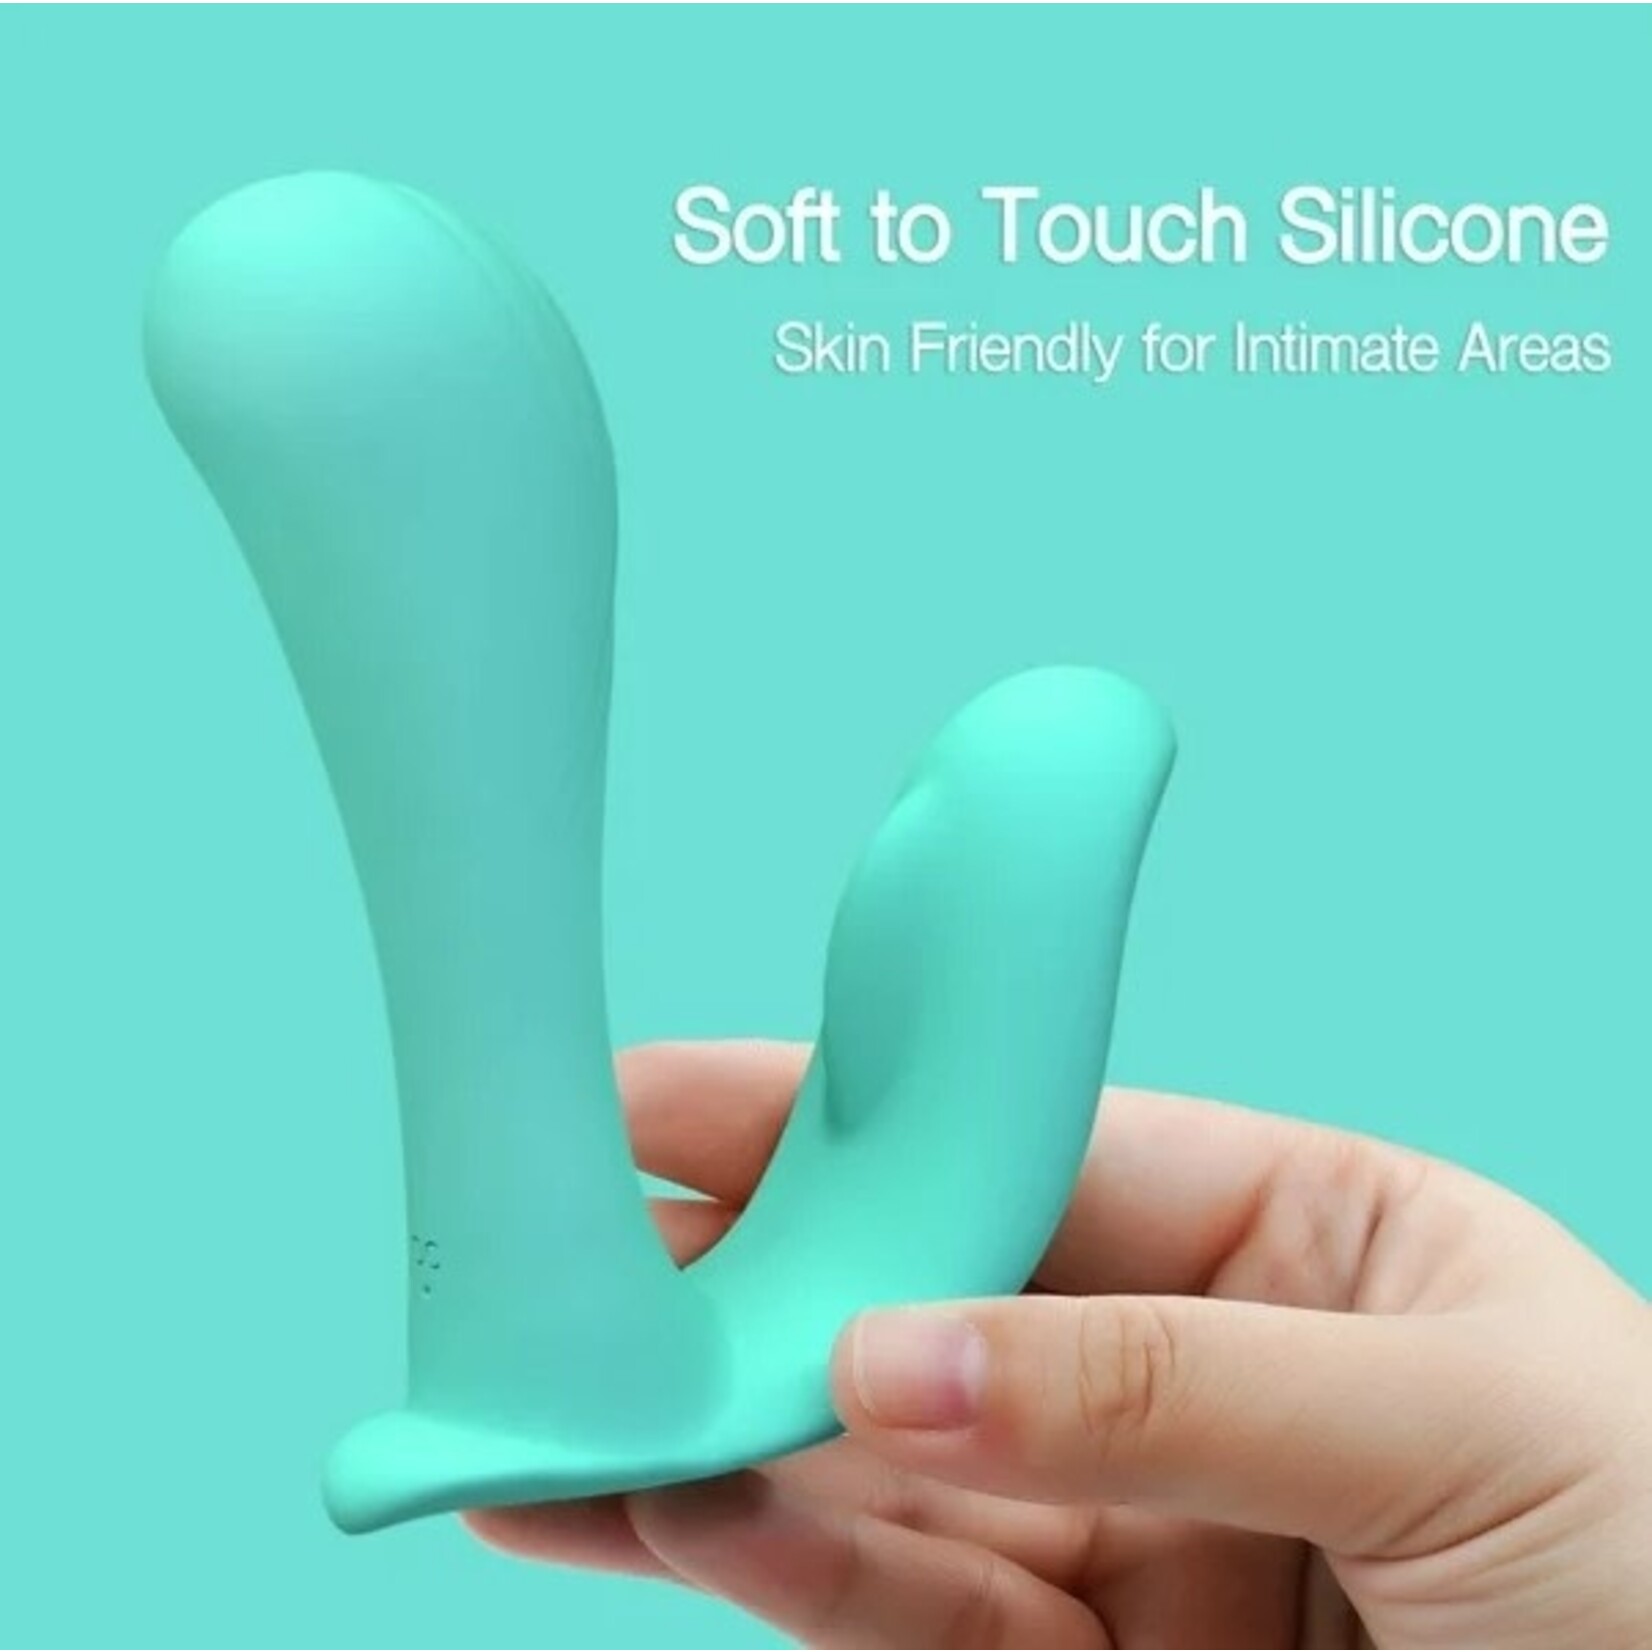 TRACY'S DOG TRACY's DOG - WEARABLE PANTY VIBRATOR WITH WIRELESS TEAL